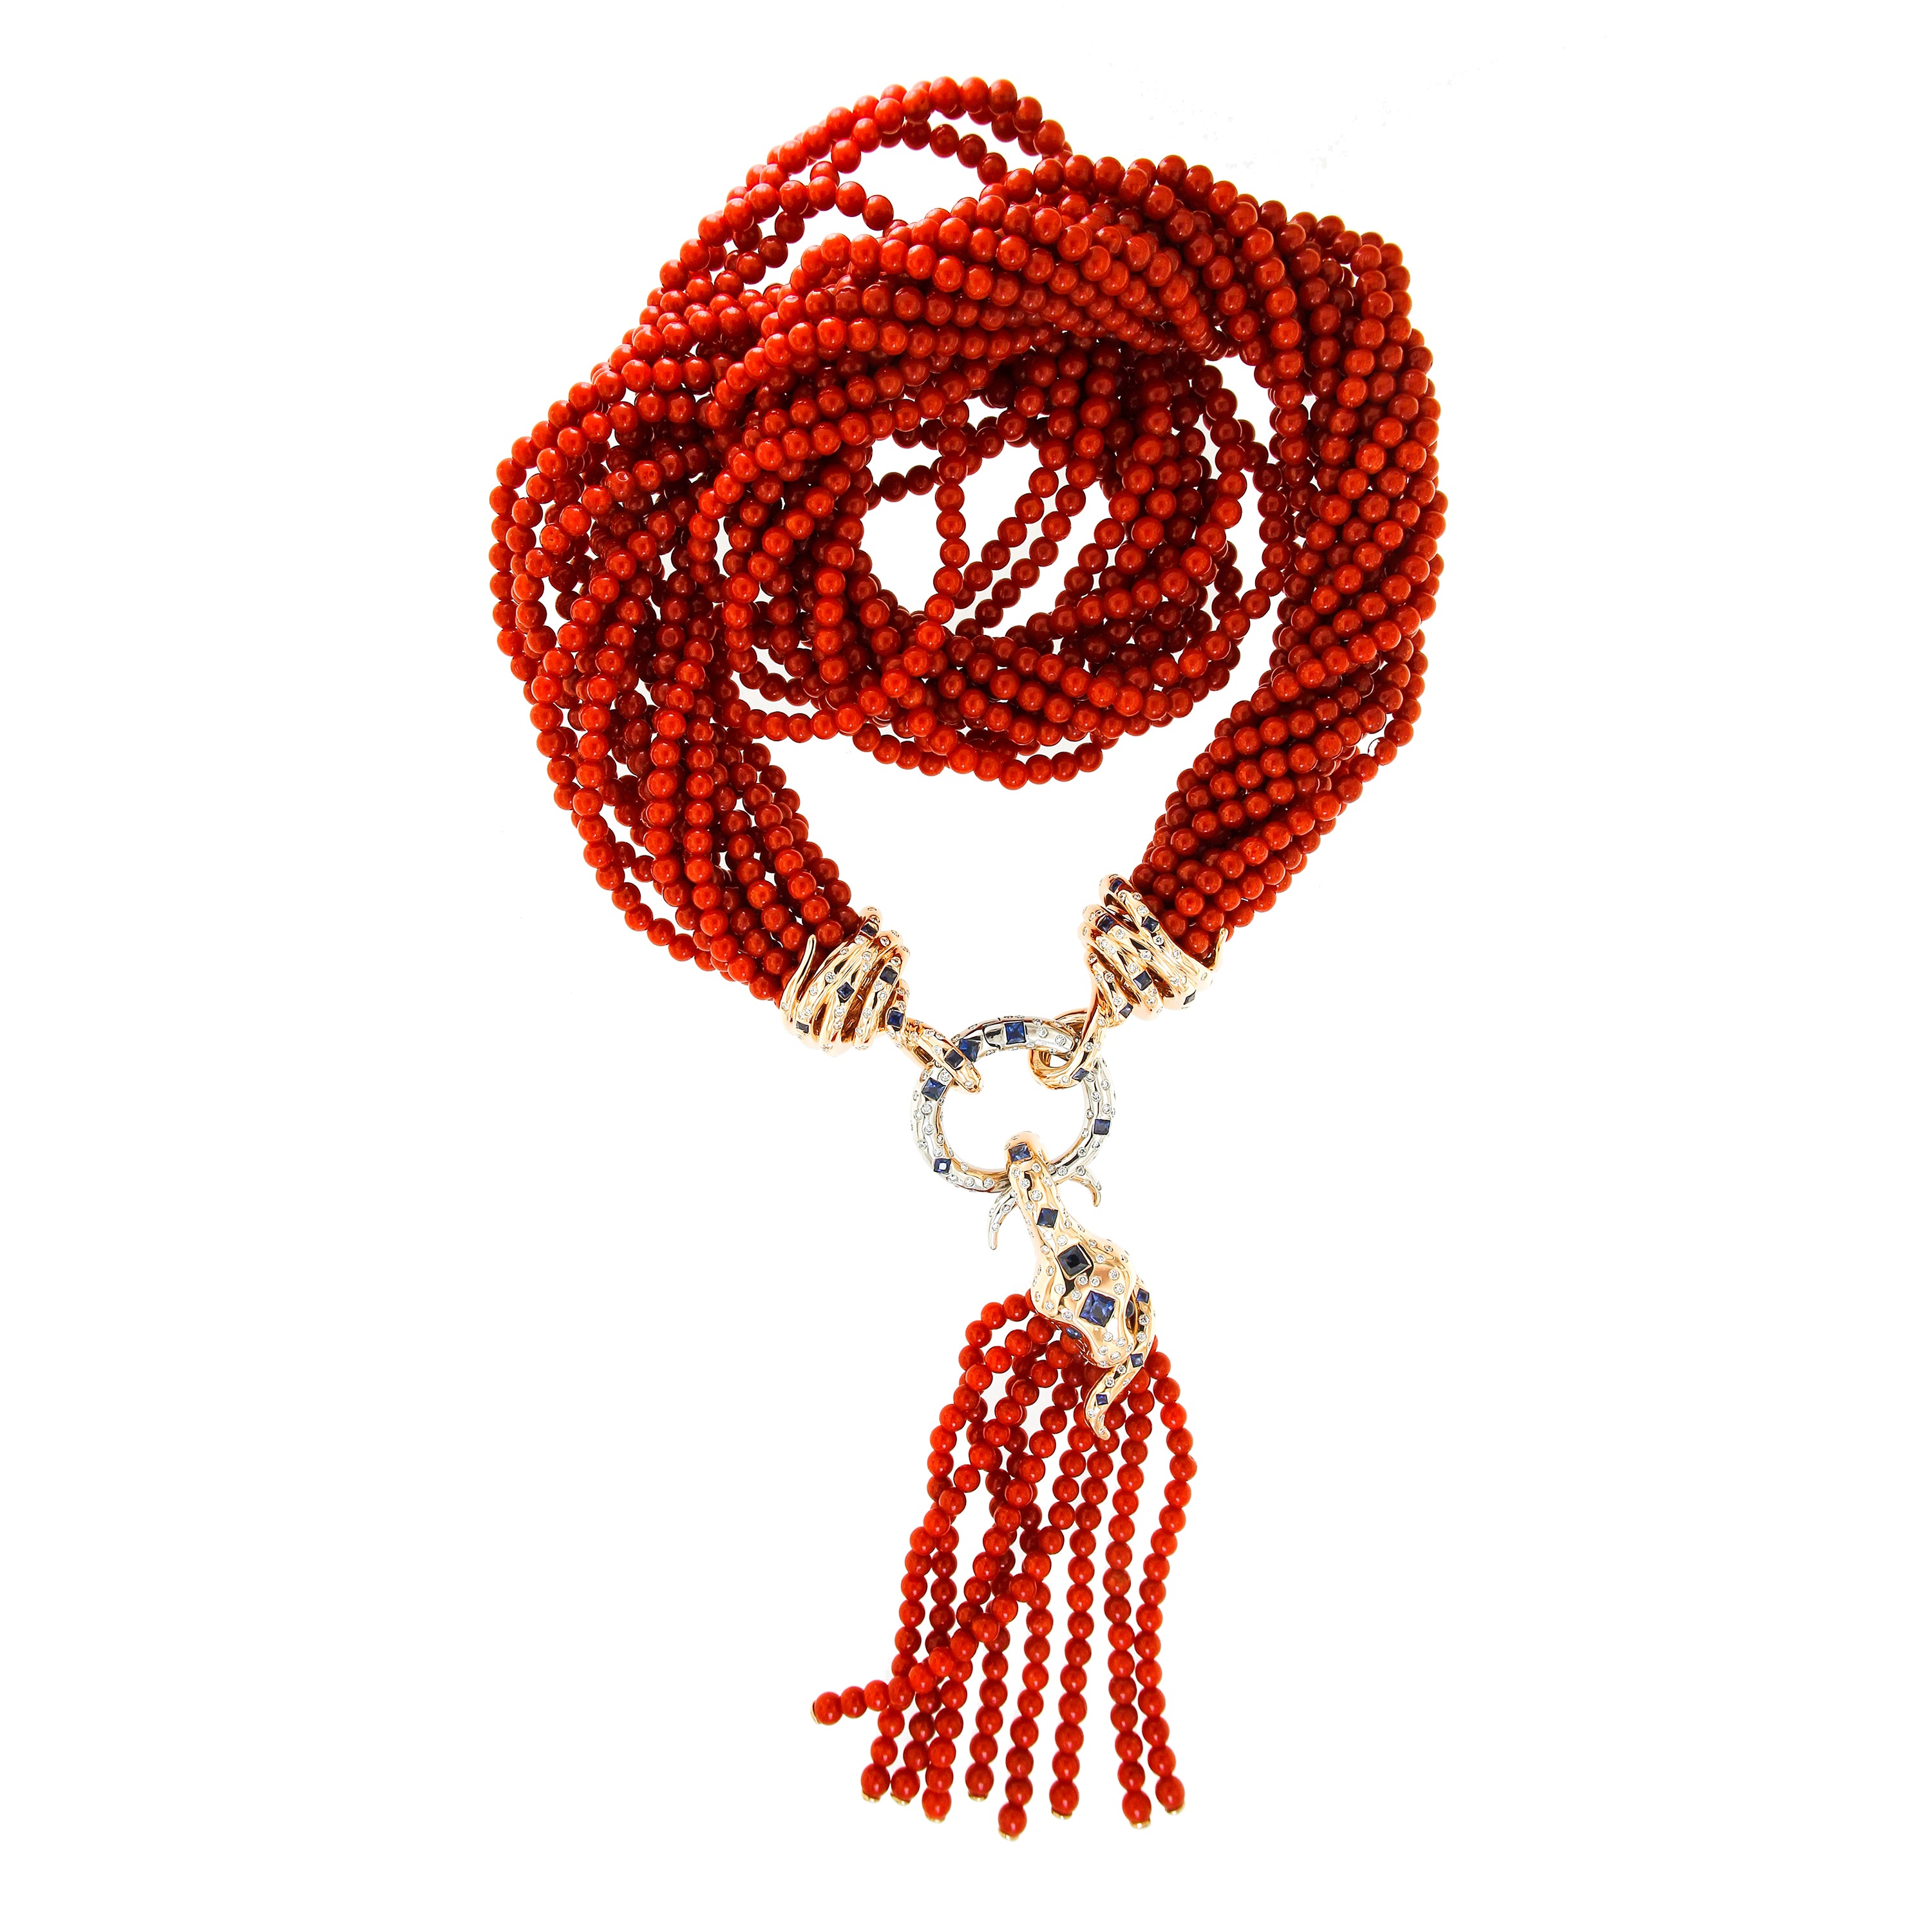 Necklace "Coral Tassle" Pink Gold with Corals